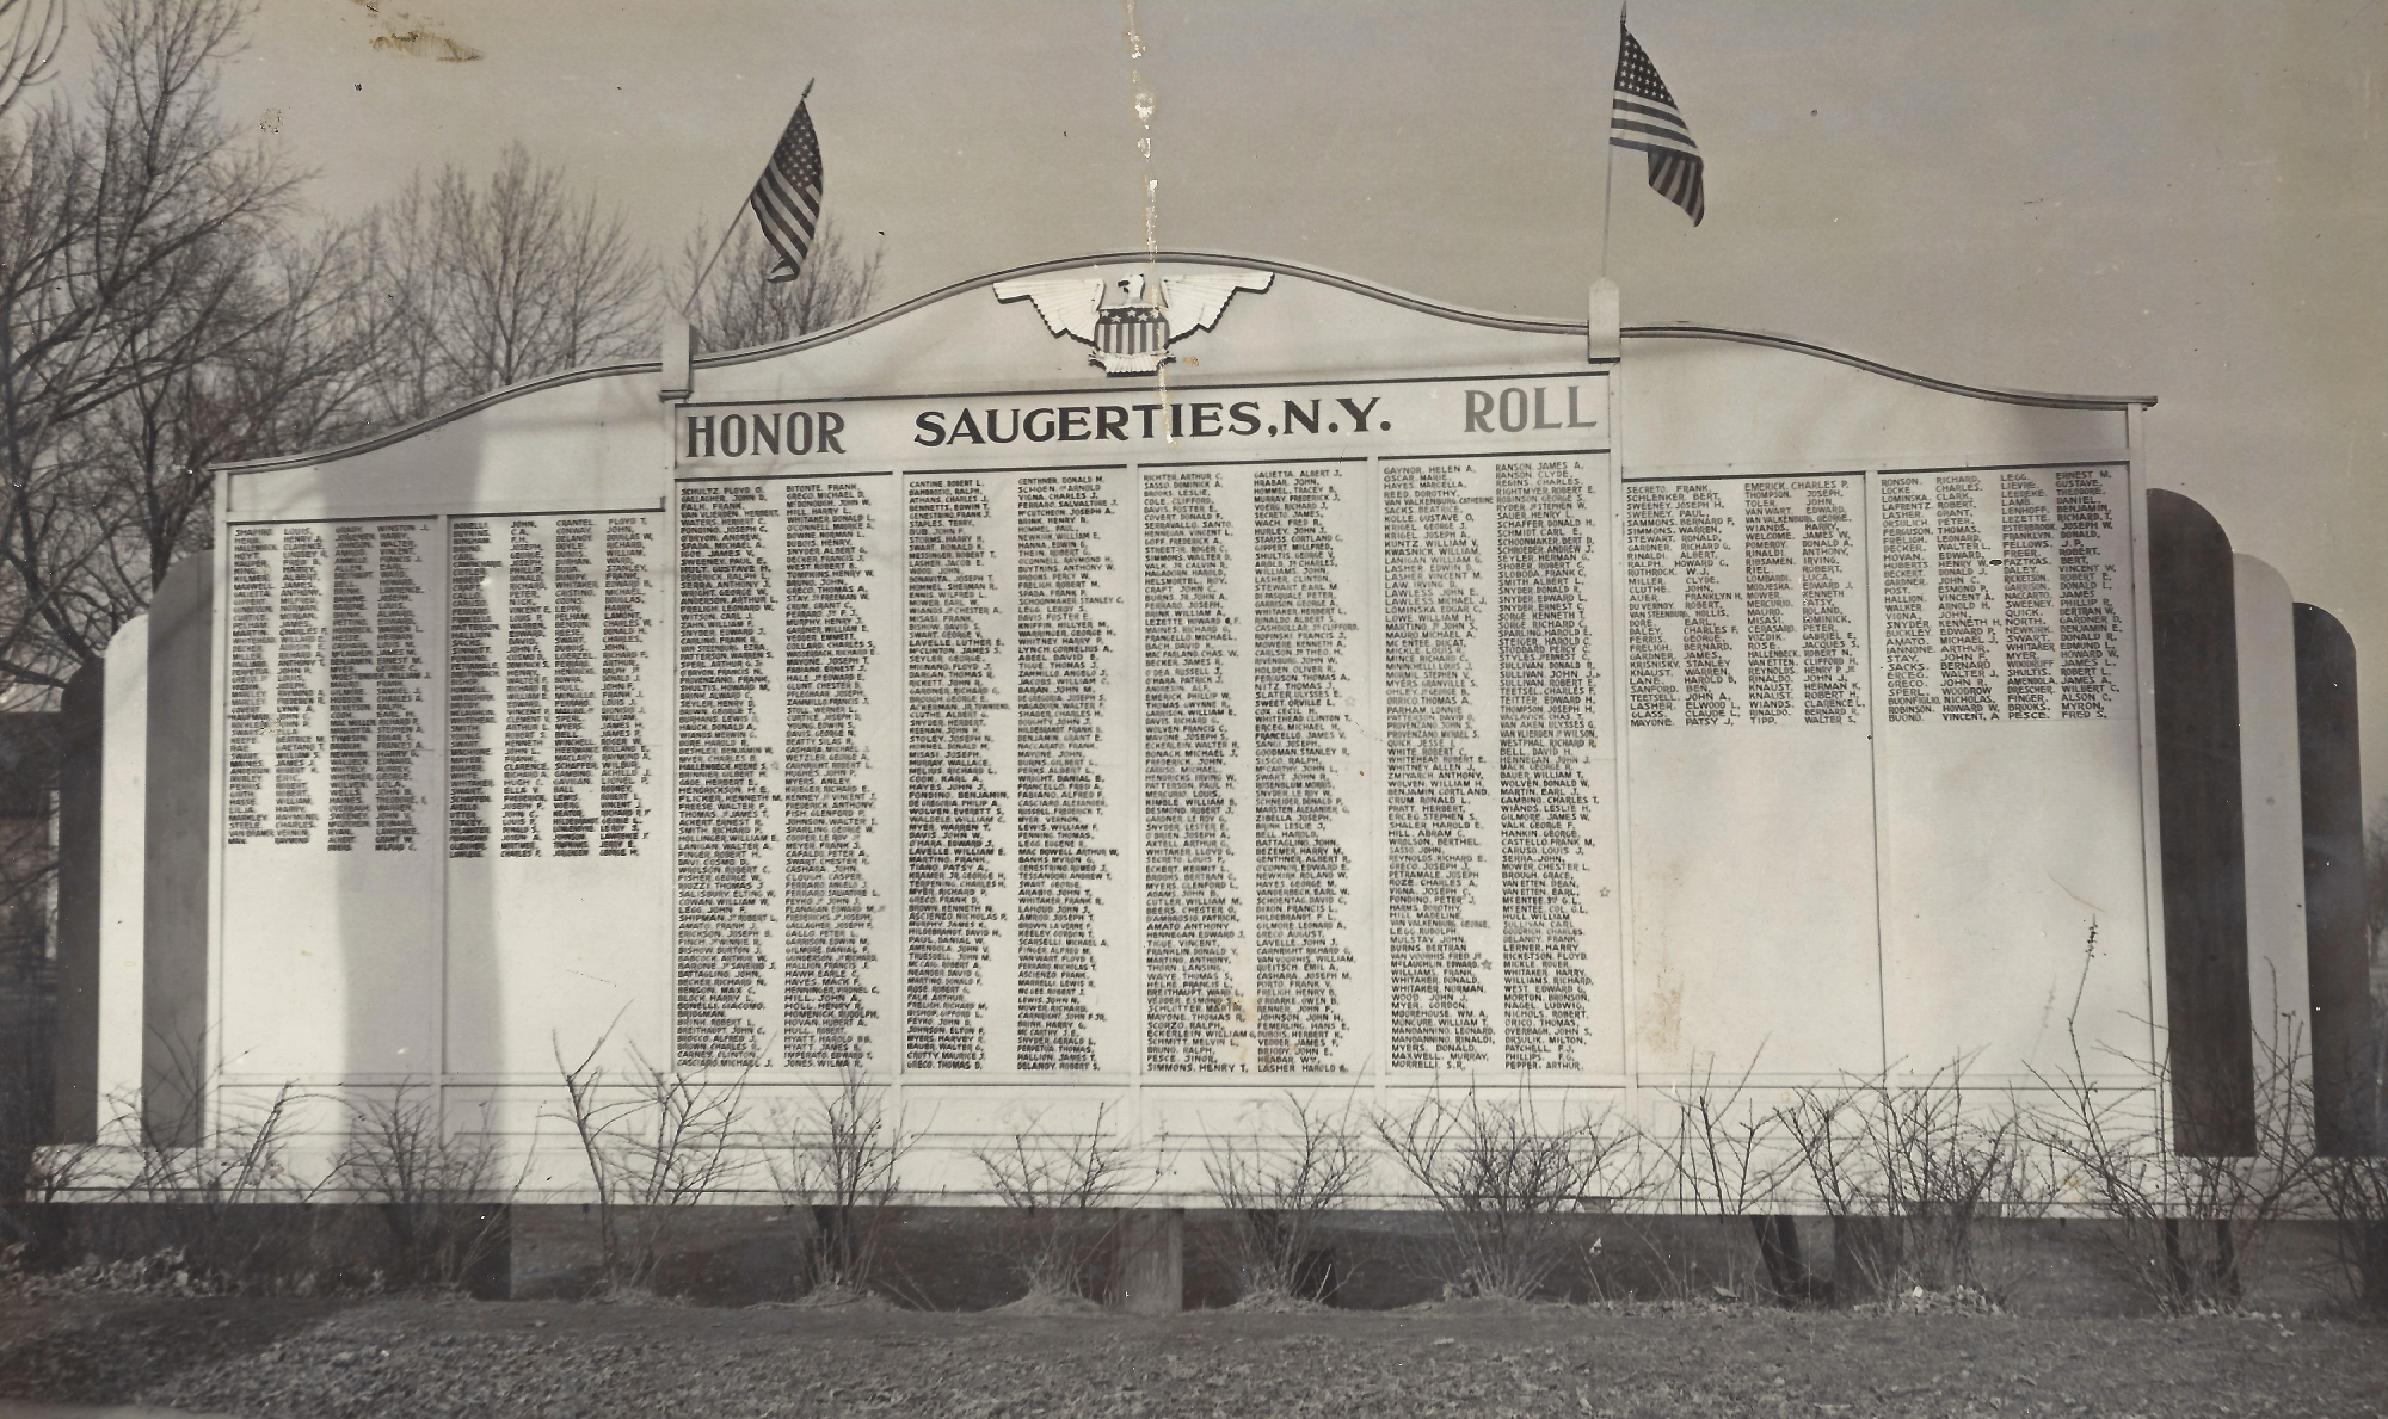 The Saugerties, NY World War Two Honor Roll Monument